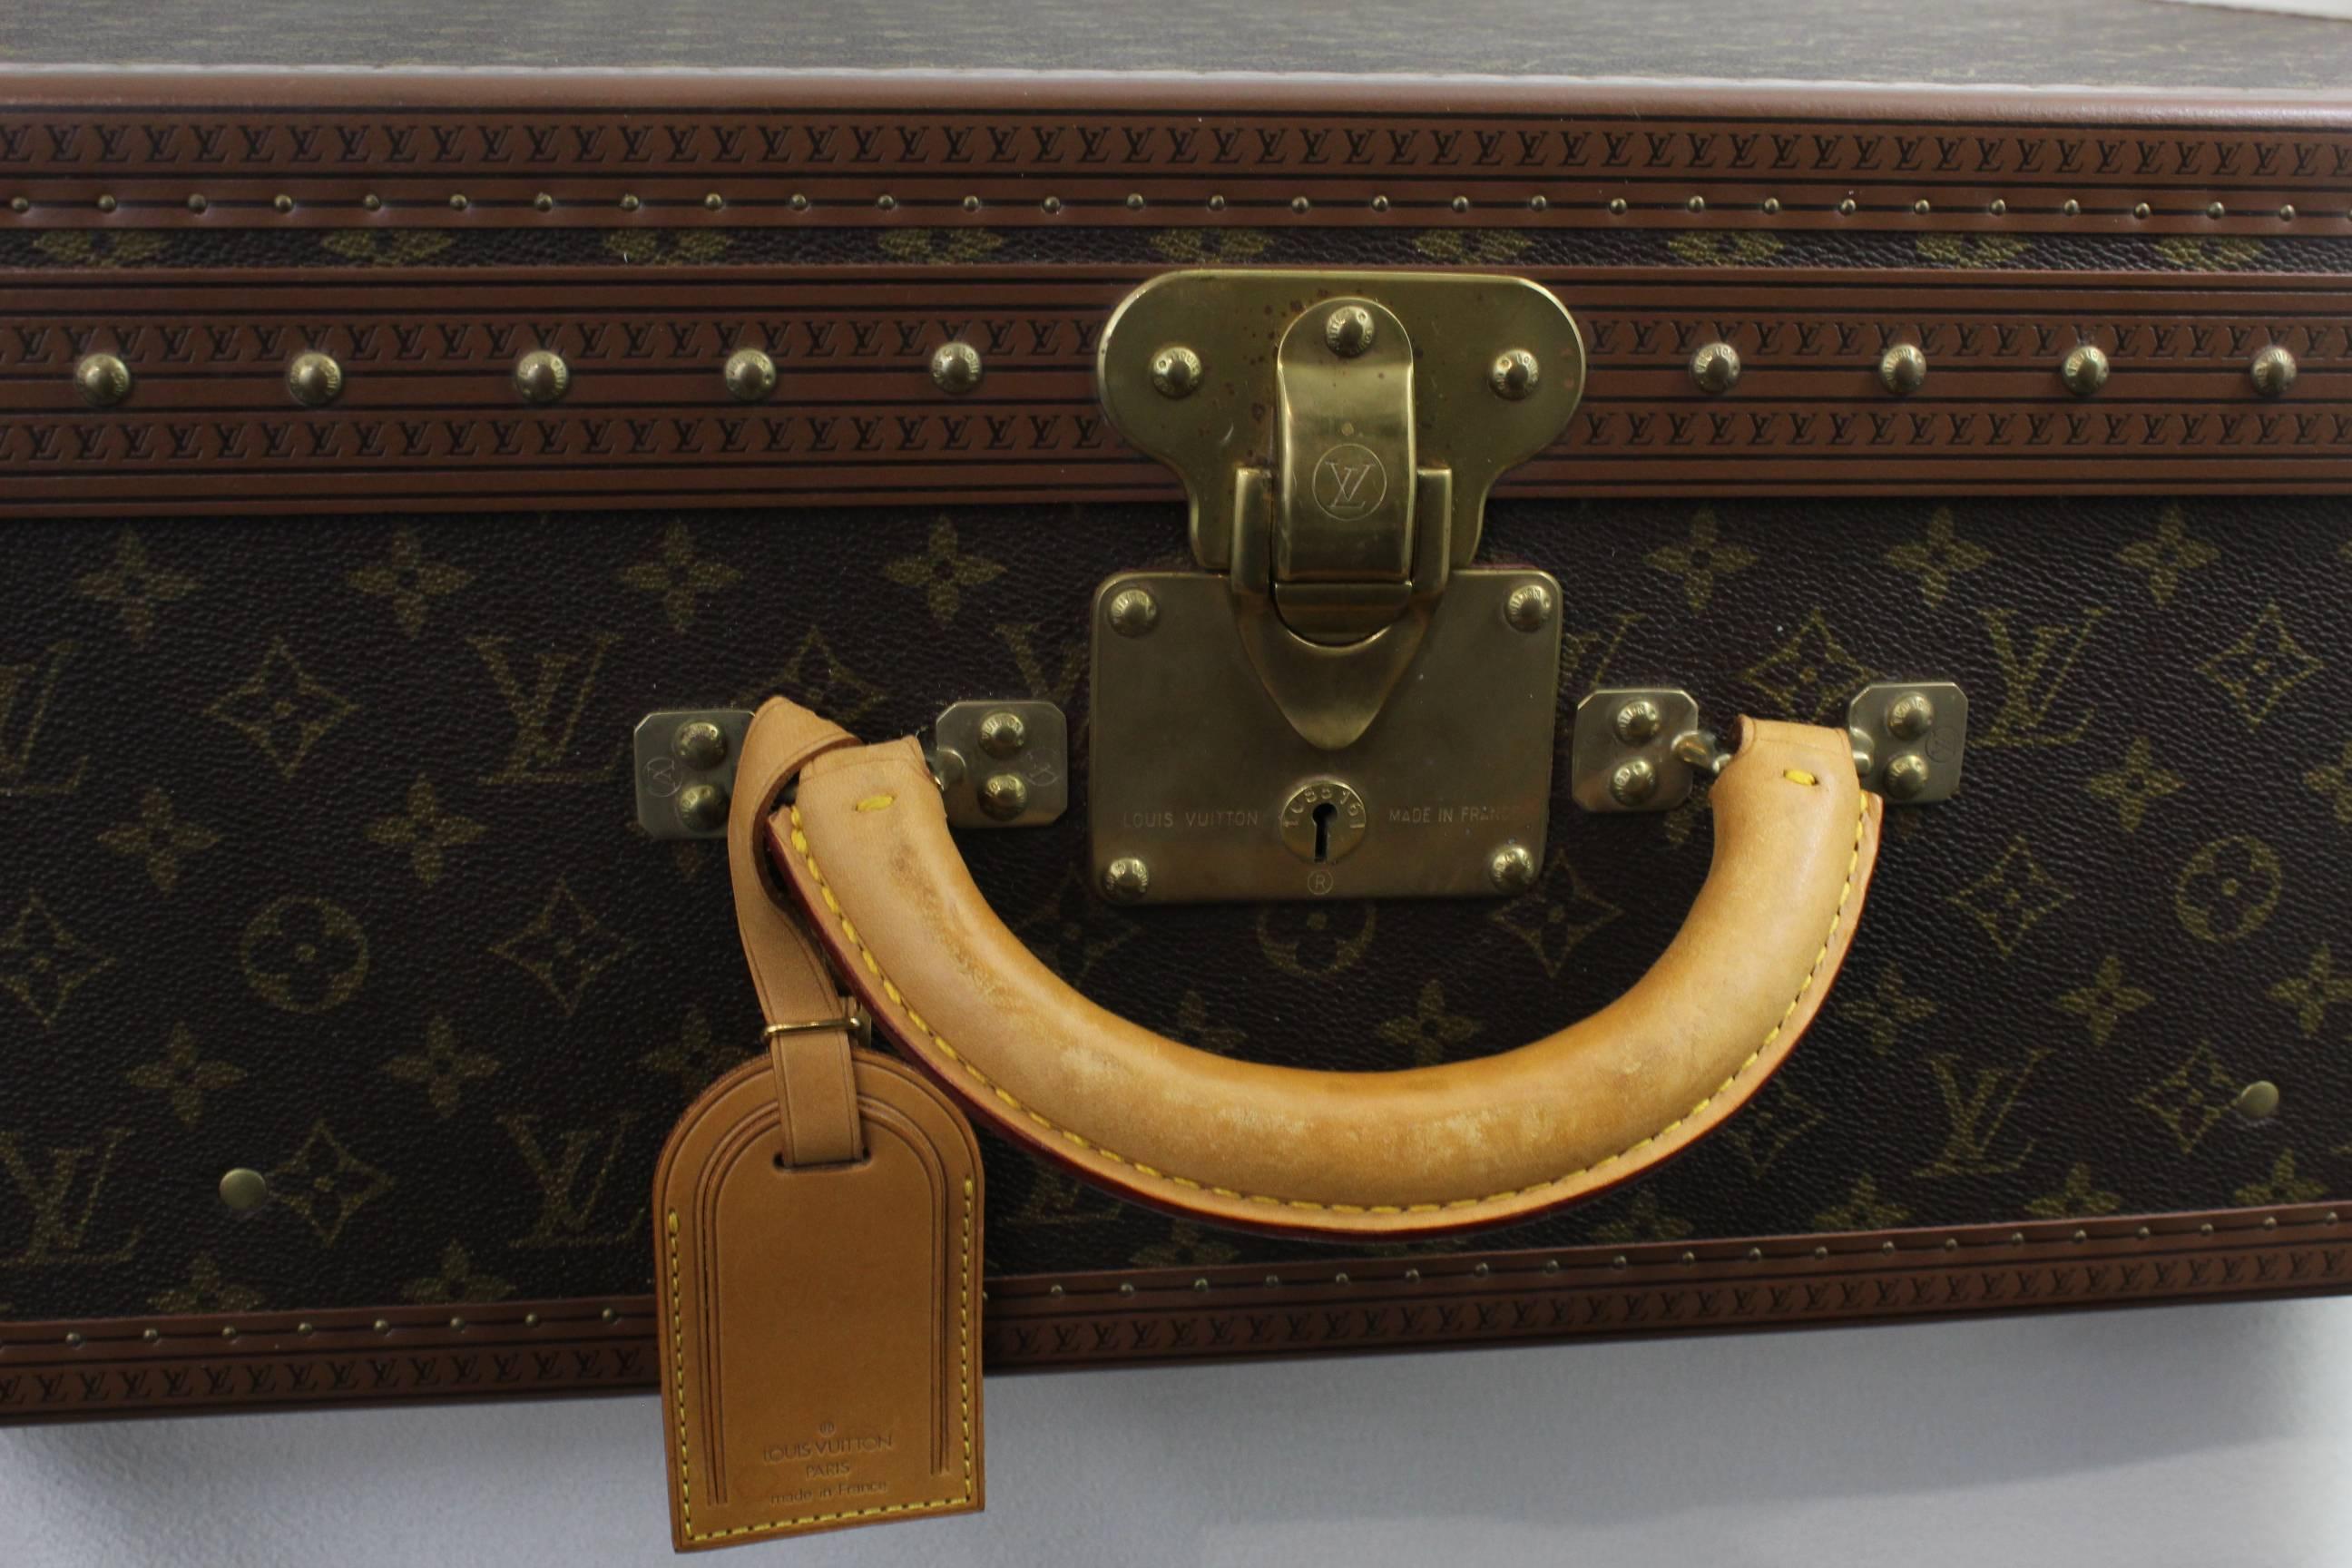 Nice Vintage Louis Vuitton Alzer Trunk in monogram canvas.

Good condition some signs of use

Sold with keys and internal tray